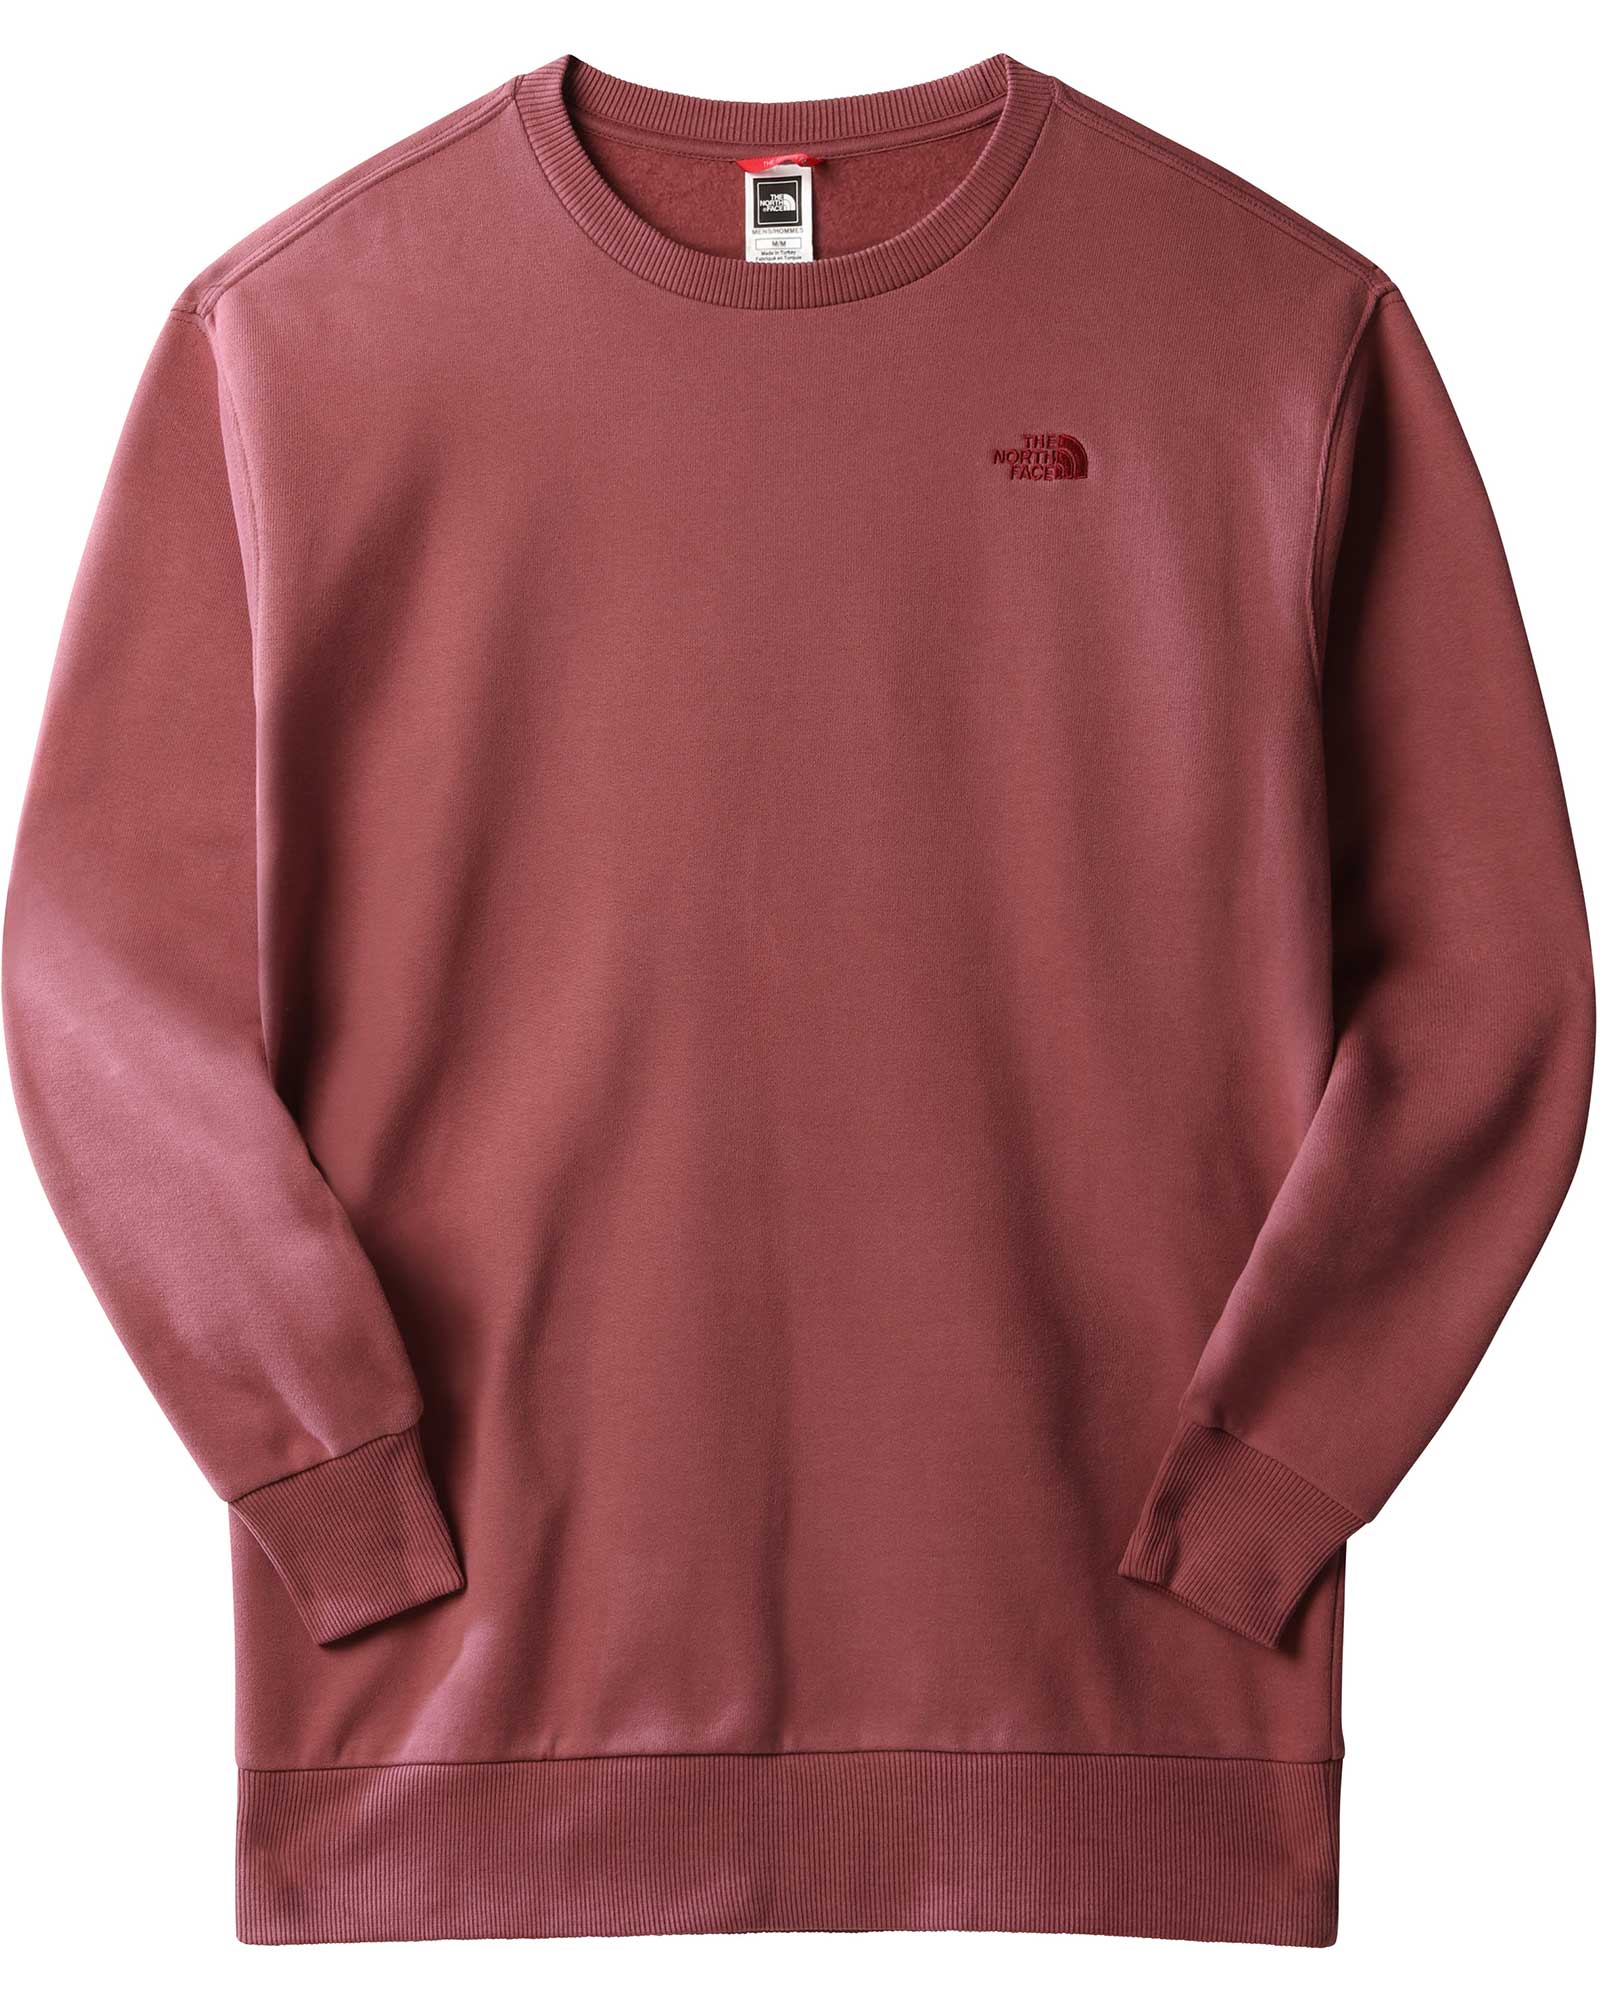 Product image of The North Face City Women's Standard Crew